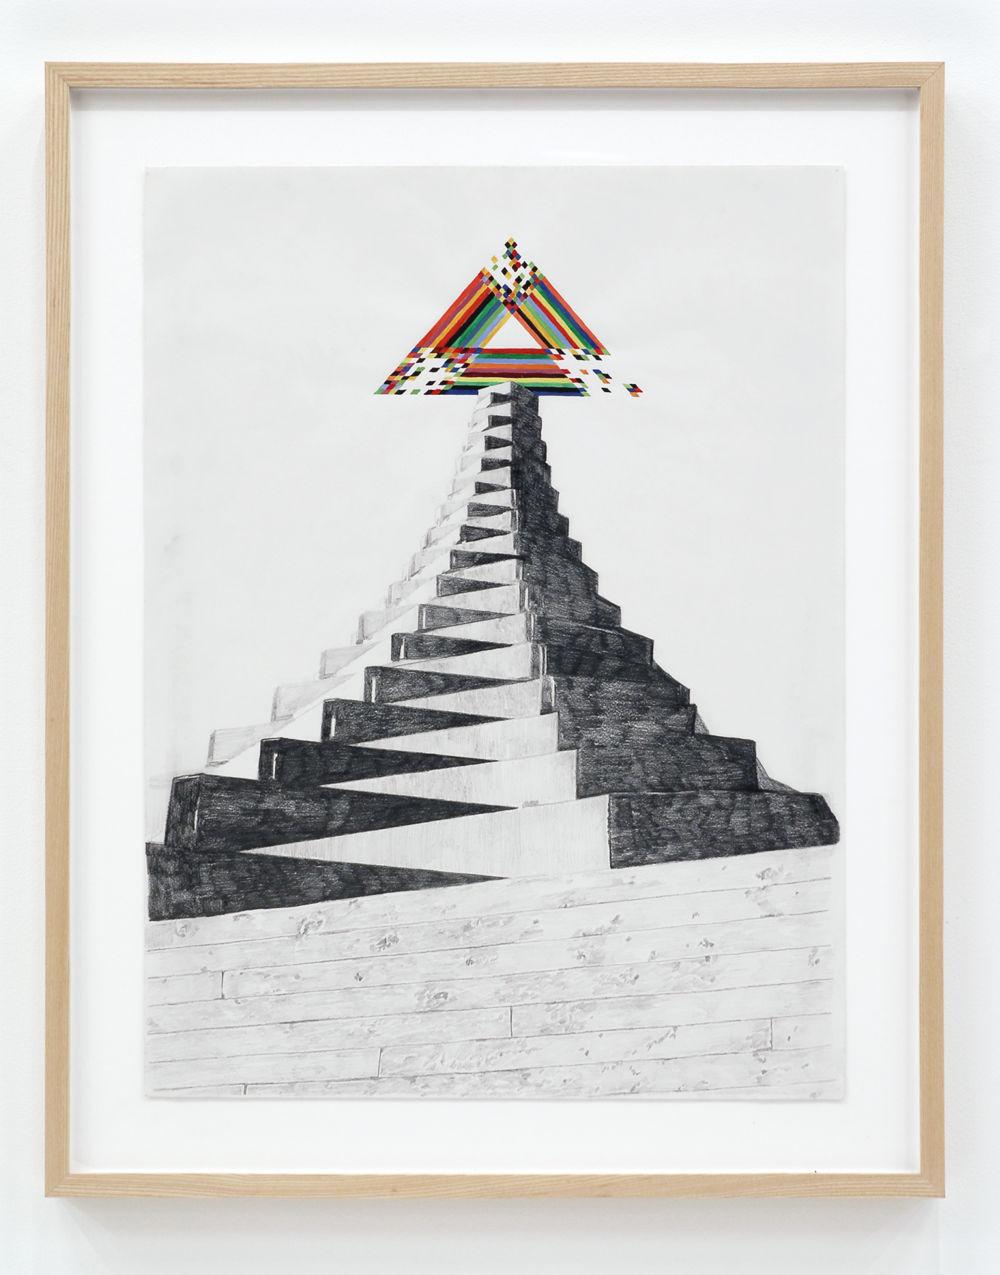 Alex Morrison, The Poetics of Grey (No. 6), 2007, graphite and coloured pencil on paper, 29 x 23 in. (73 x 58 cm) by 